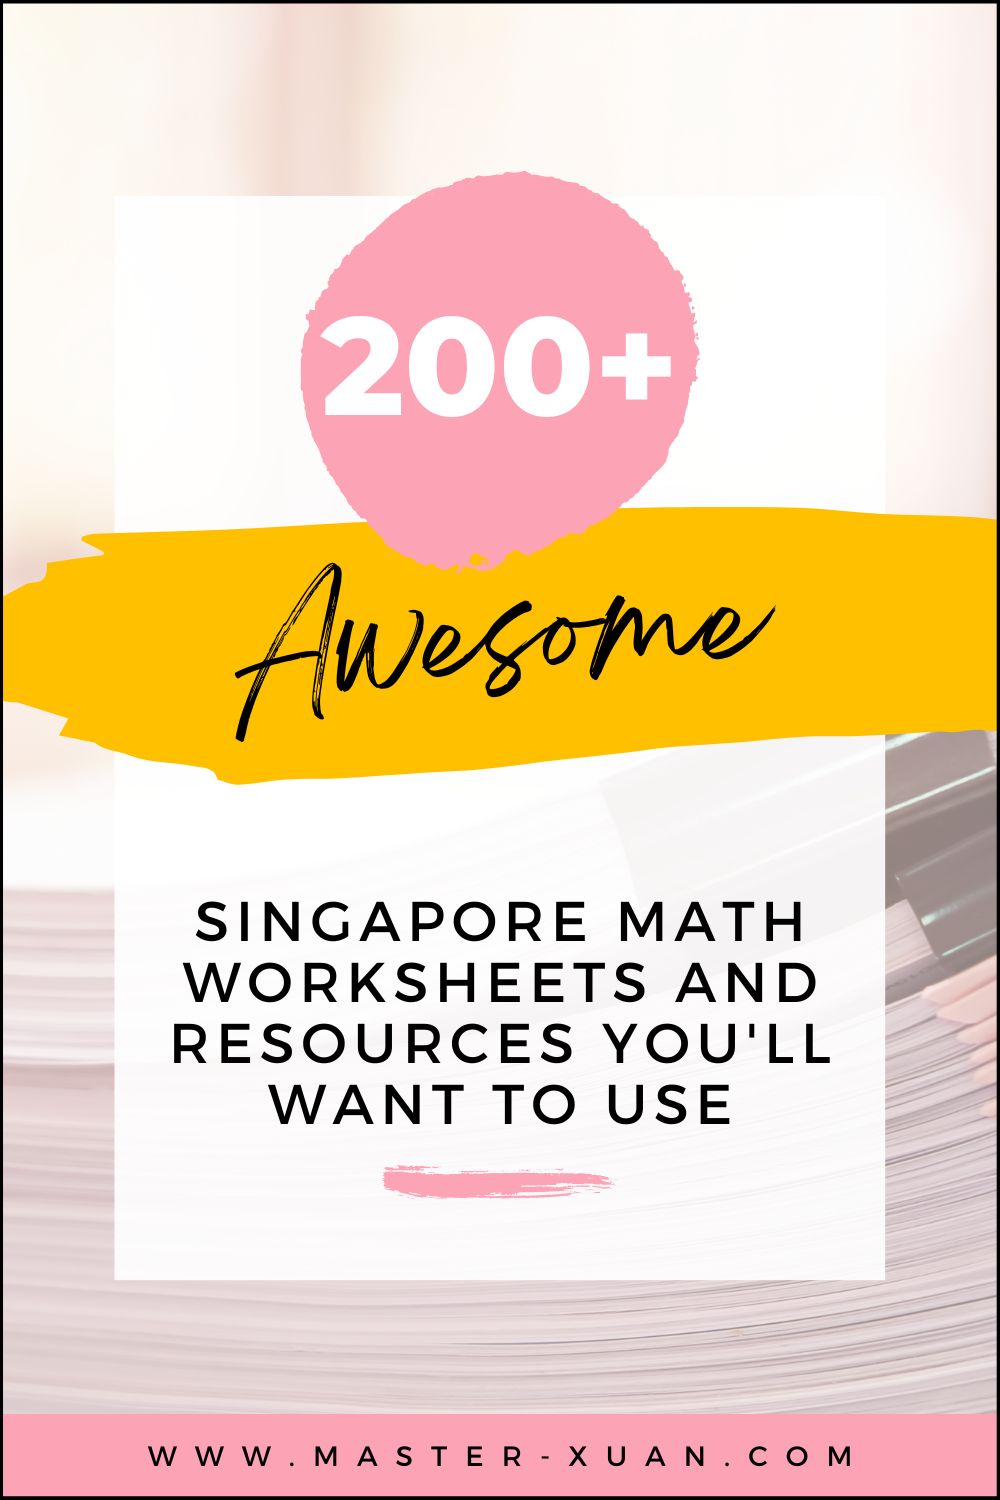 200+ awesome Singapore math worksheets and resources you'll want to use!